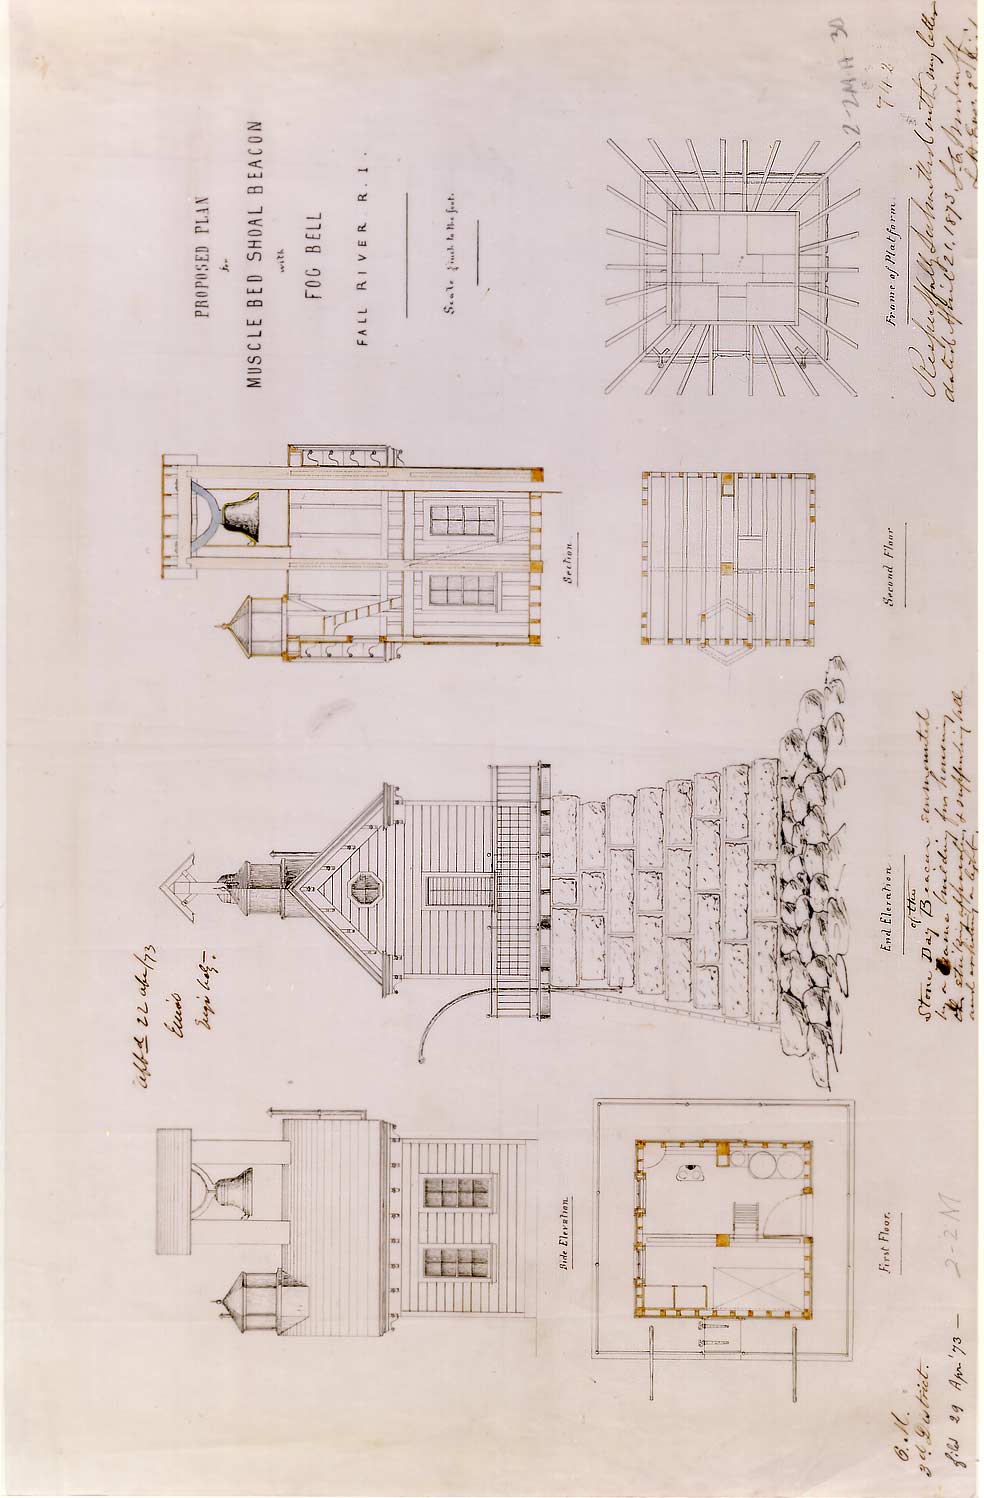  Plan for Musselbed Shoals Lighthouse